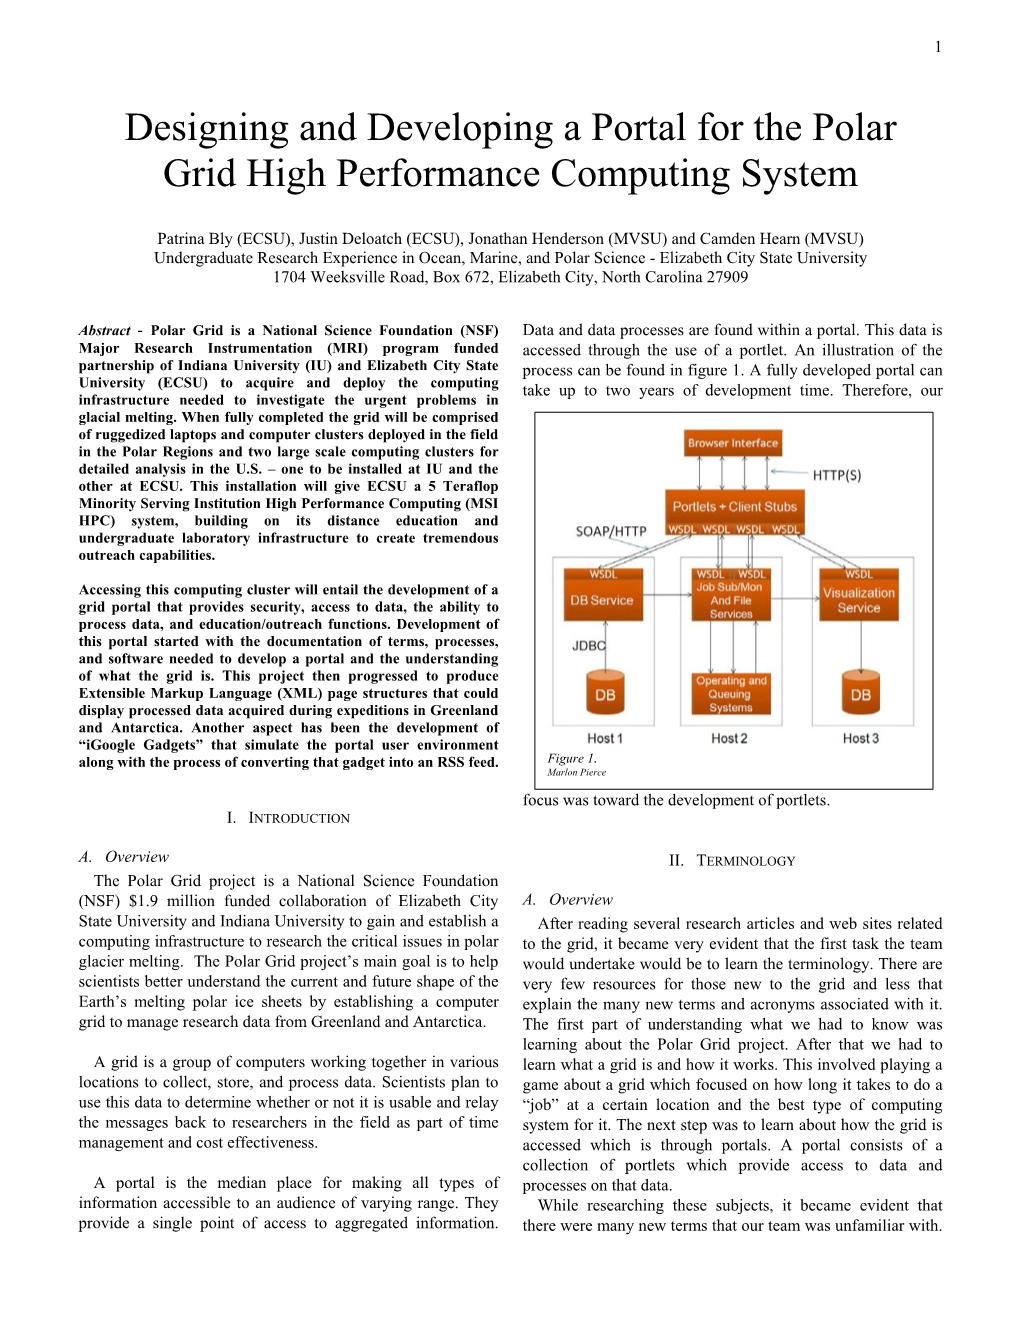 Designing and Developing a Portal for the Polar Grid High Performance Computing System